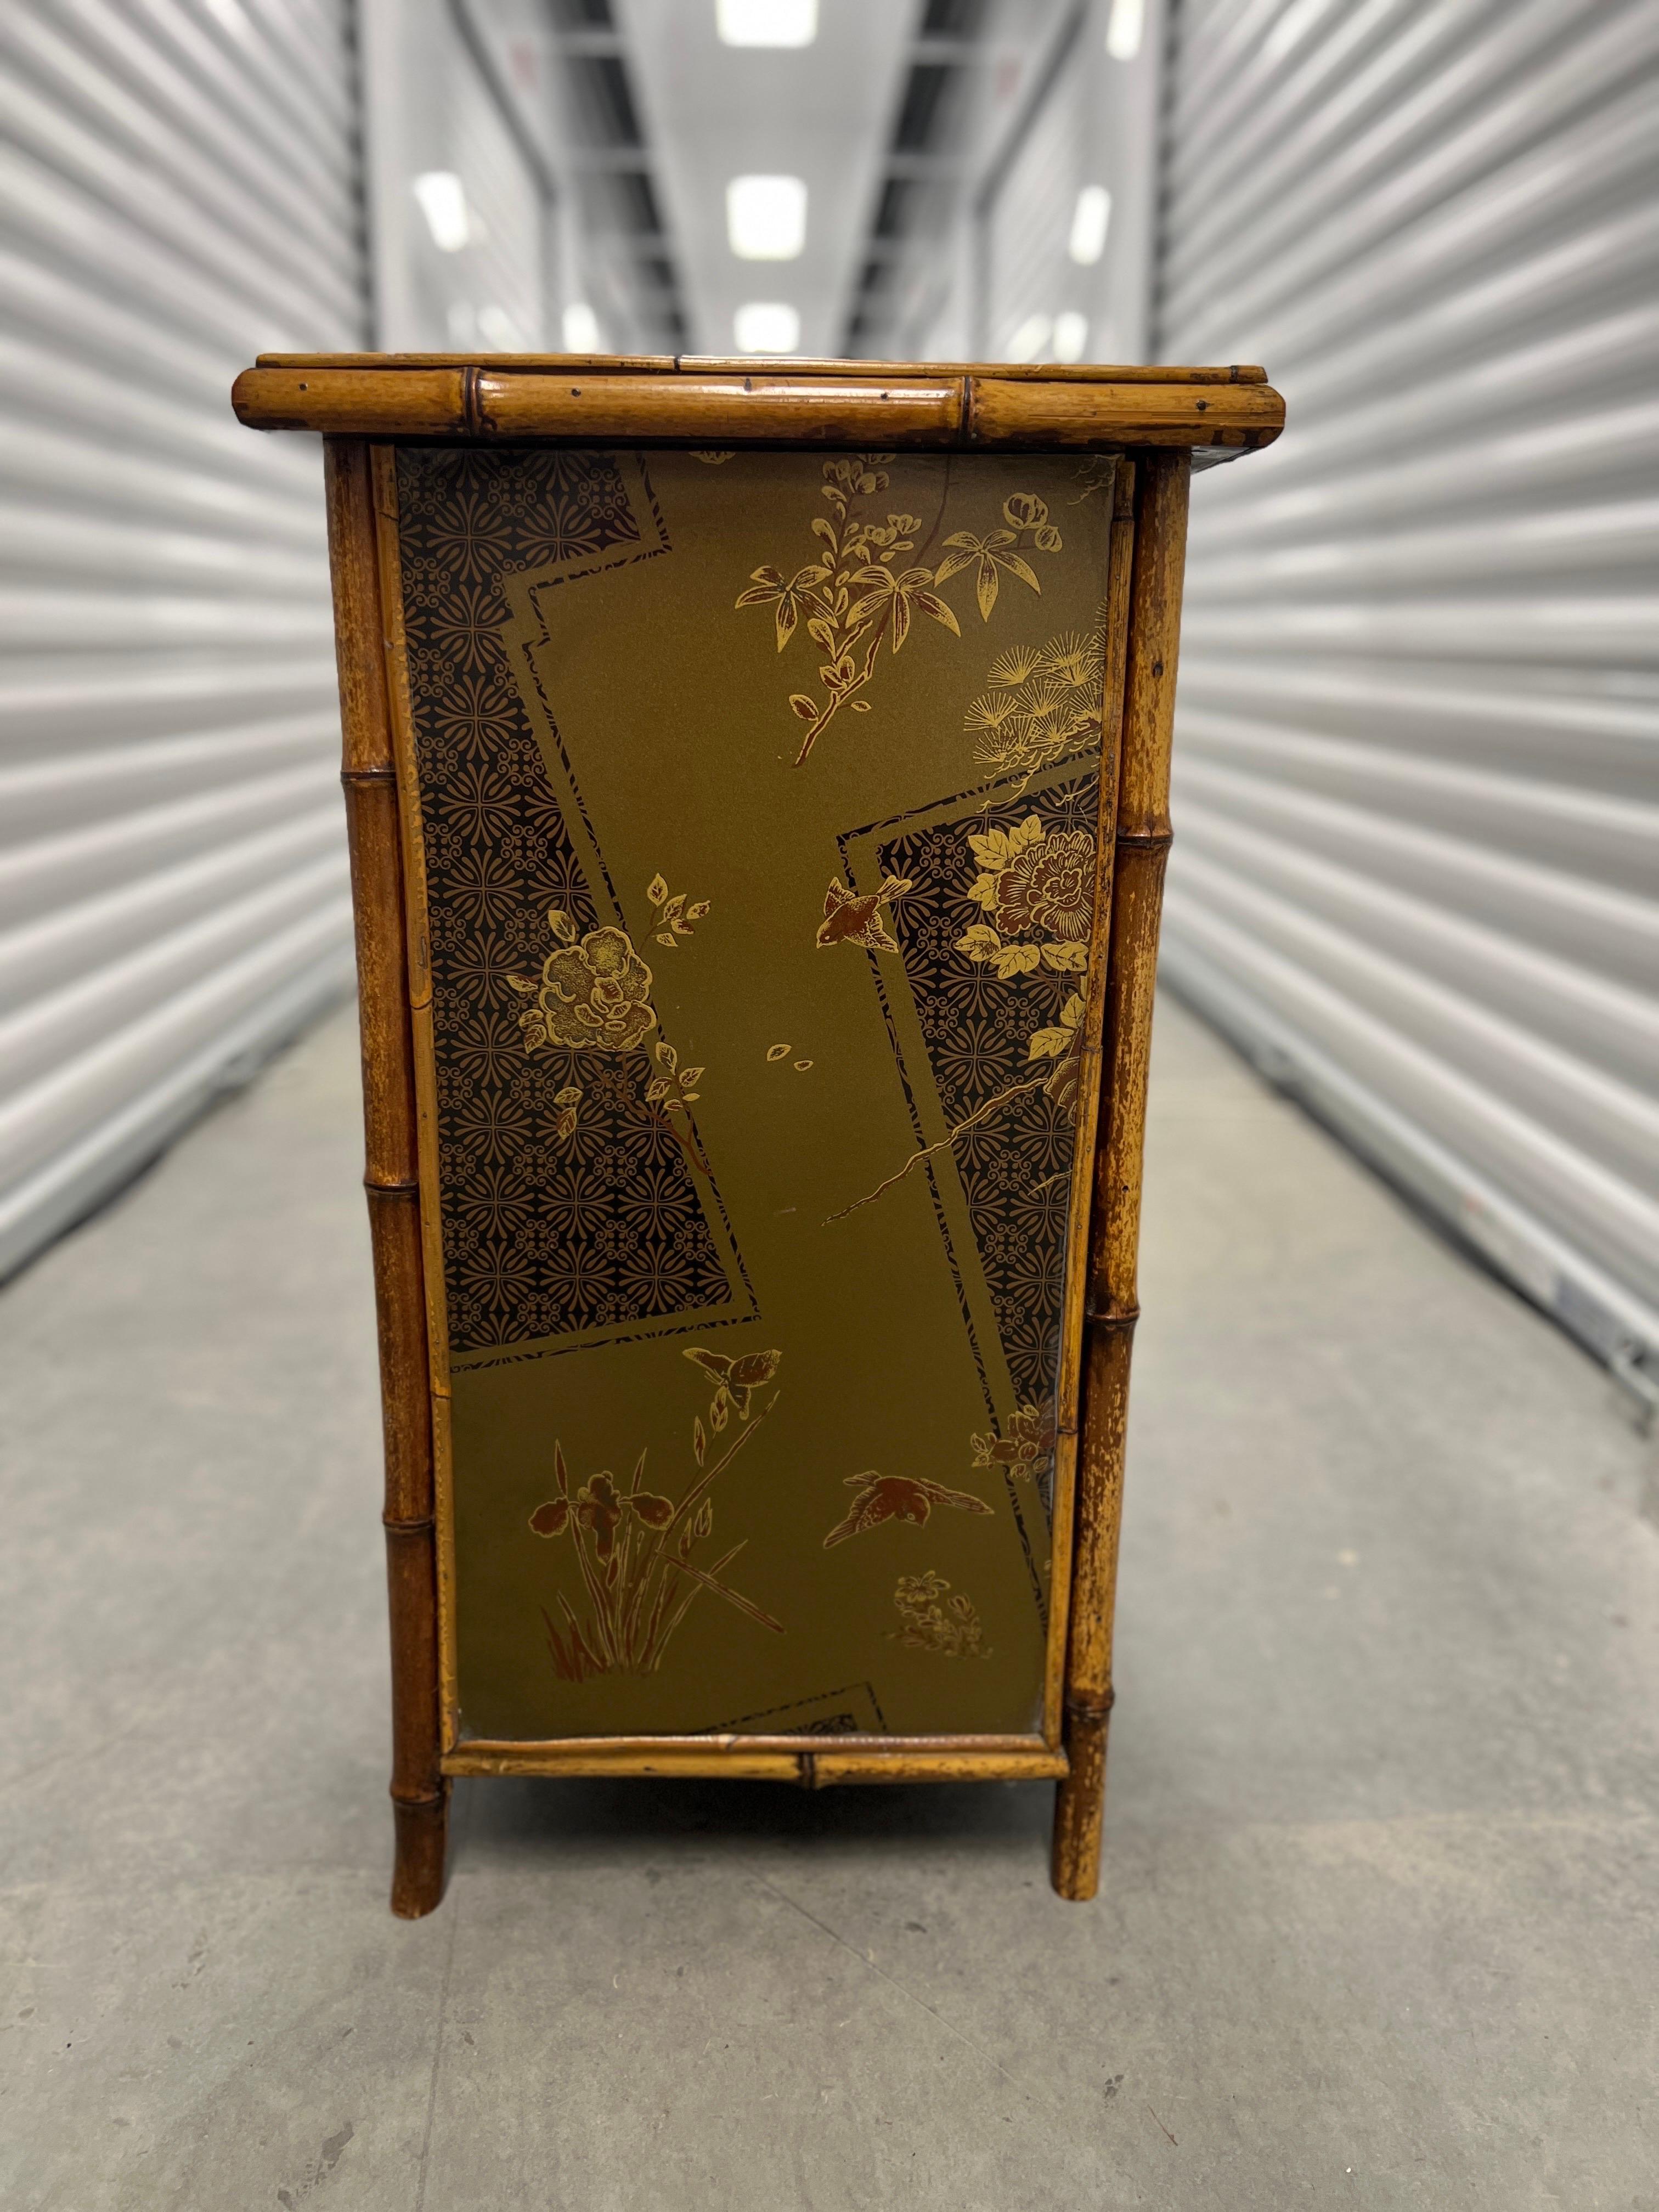 19th Century English Aesthetic Movement Japanned Bamboo Cabinet For Sale 6